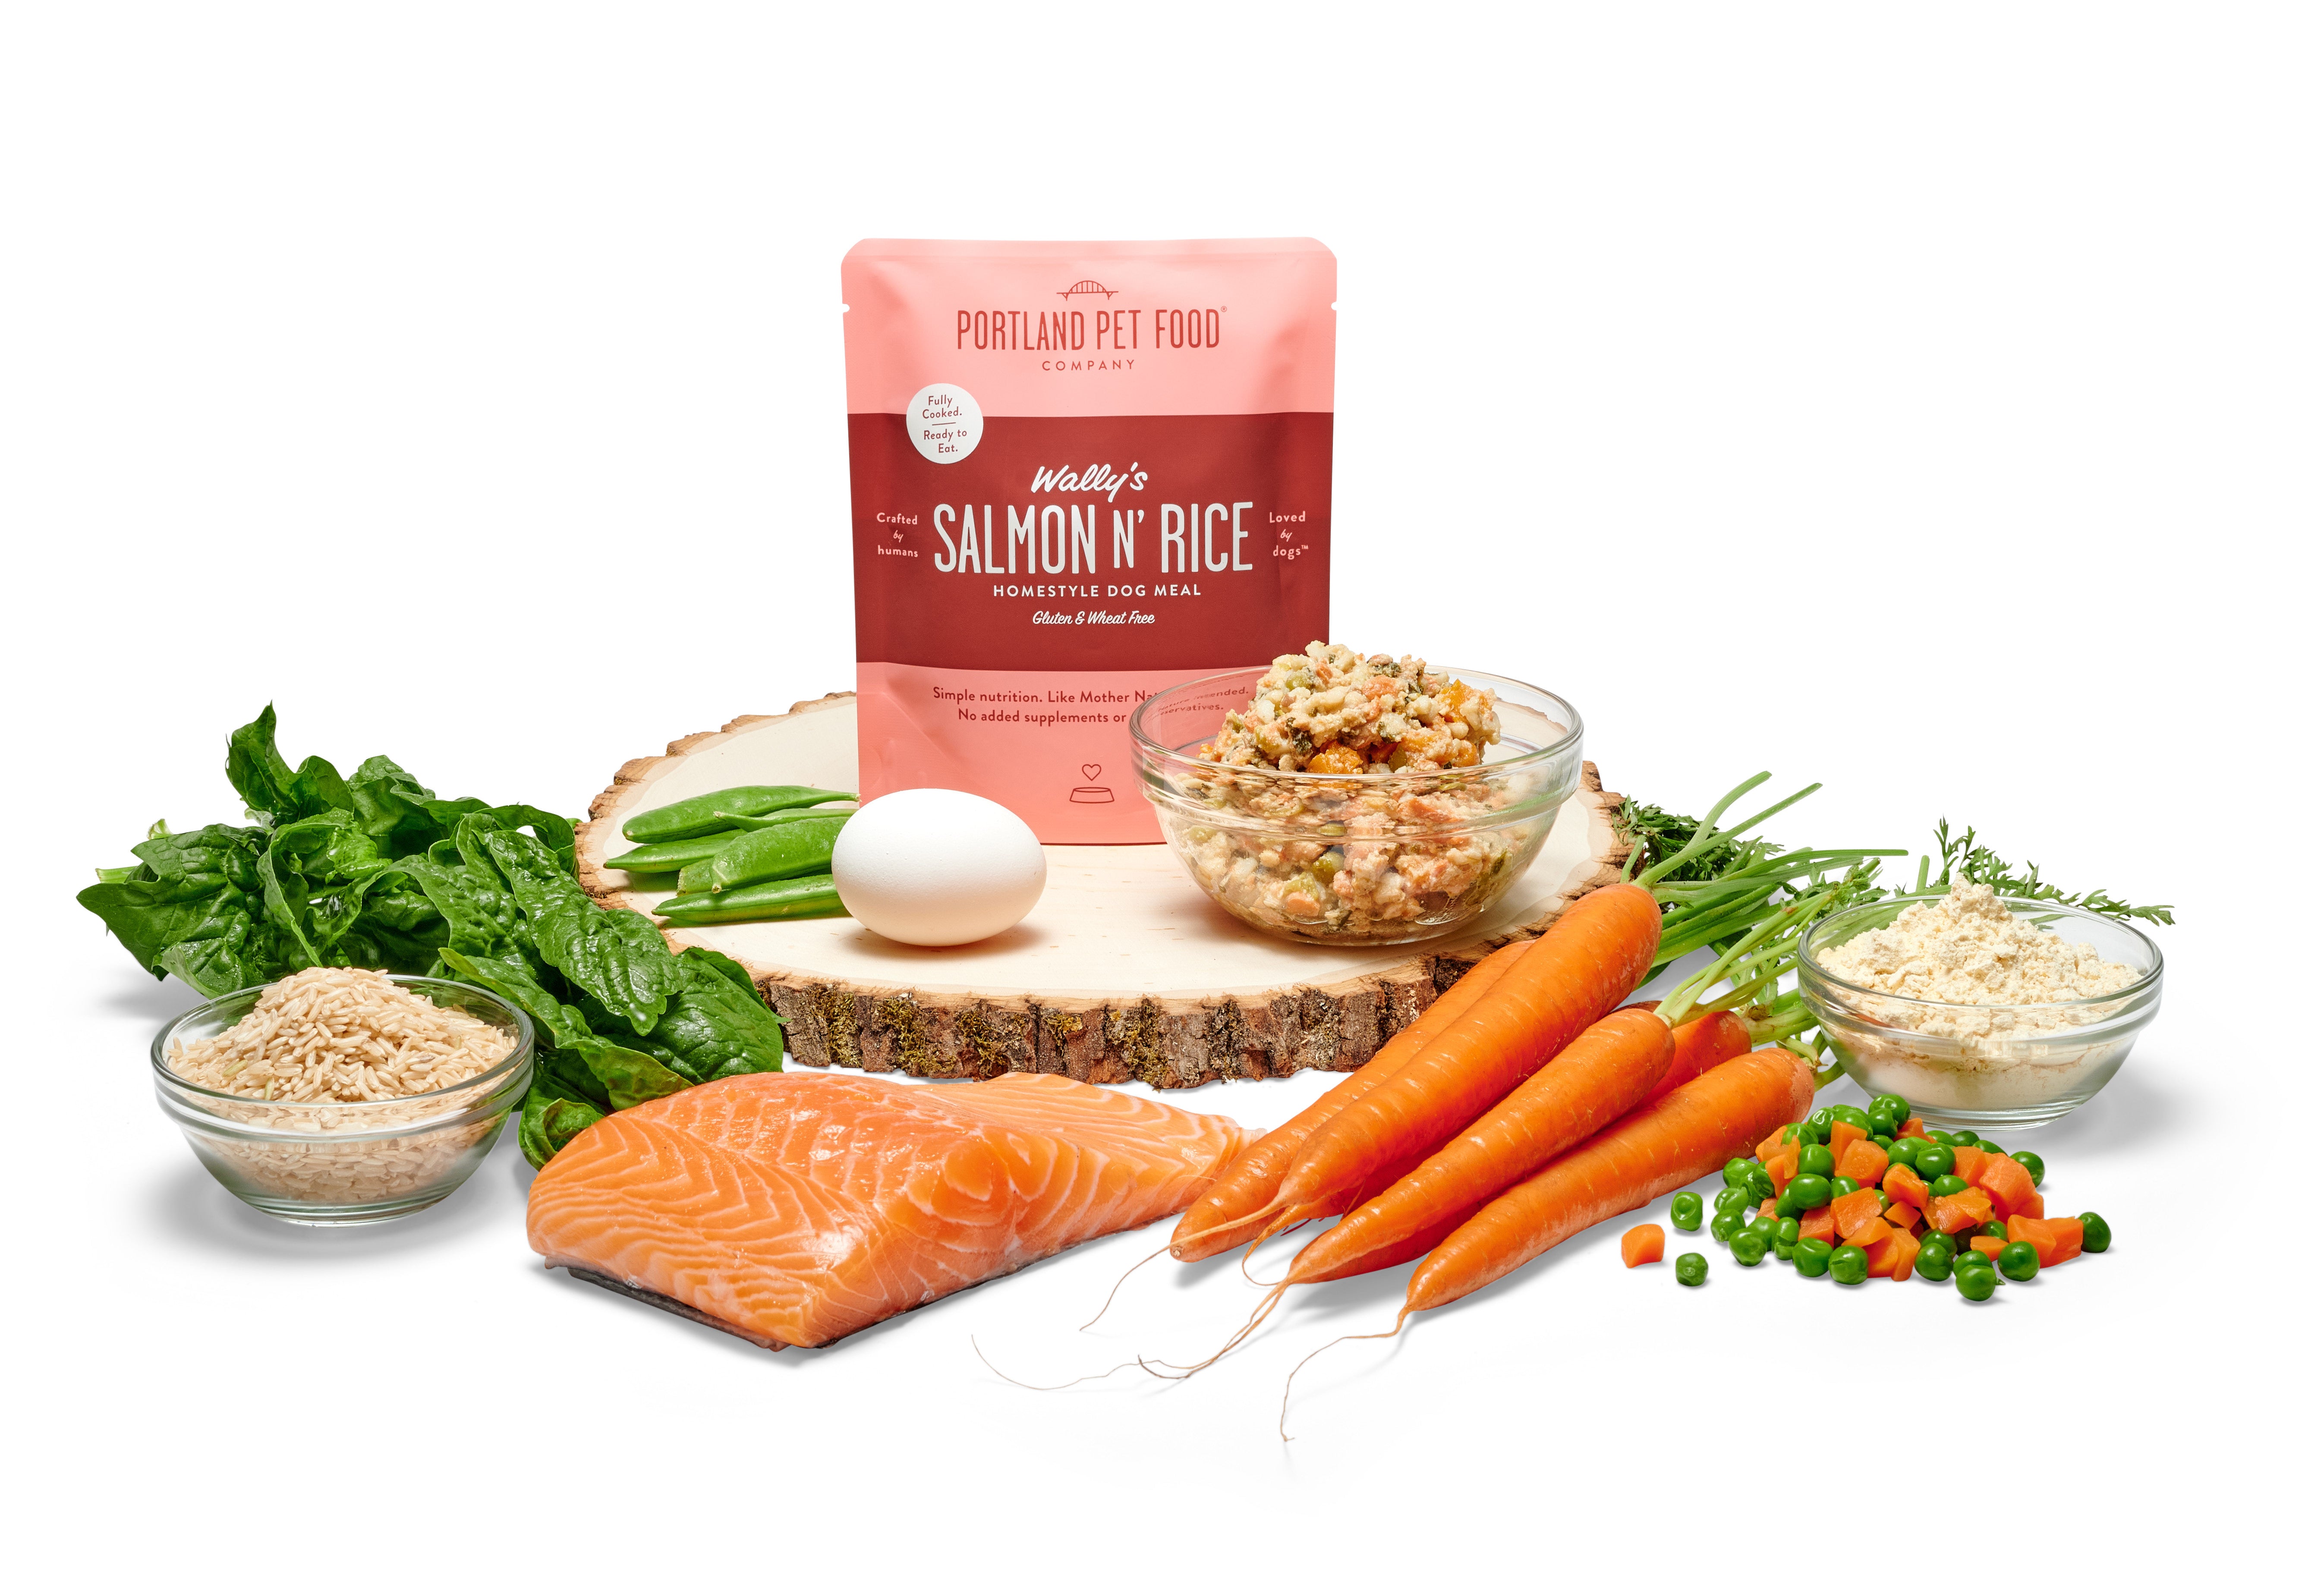 Wally’s Salmon N’ Rice Named Wet Dog Food Product Of The Year